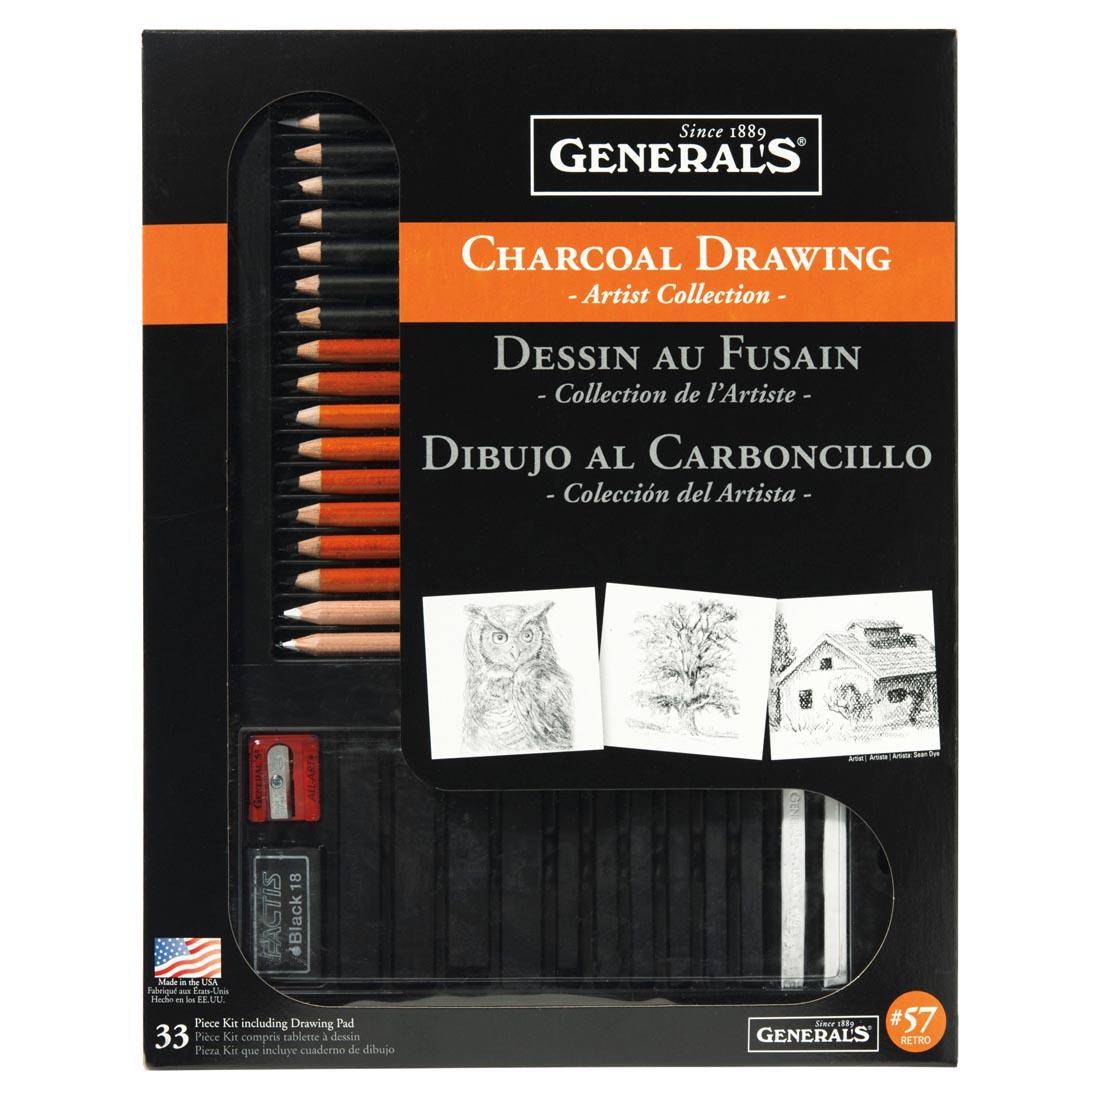 General's Charcoal Drawing Artist Collection